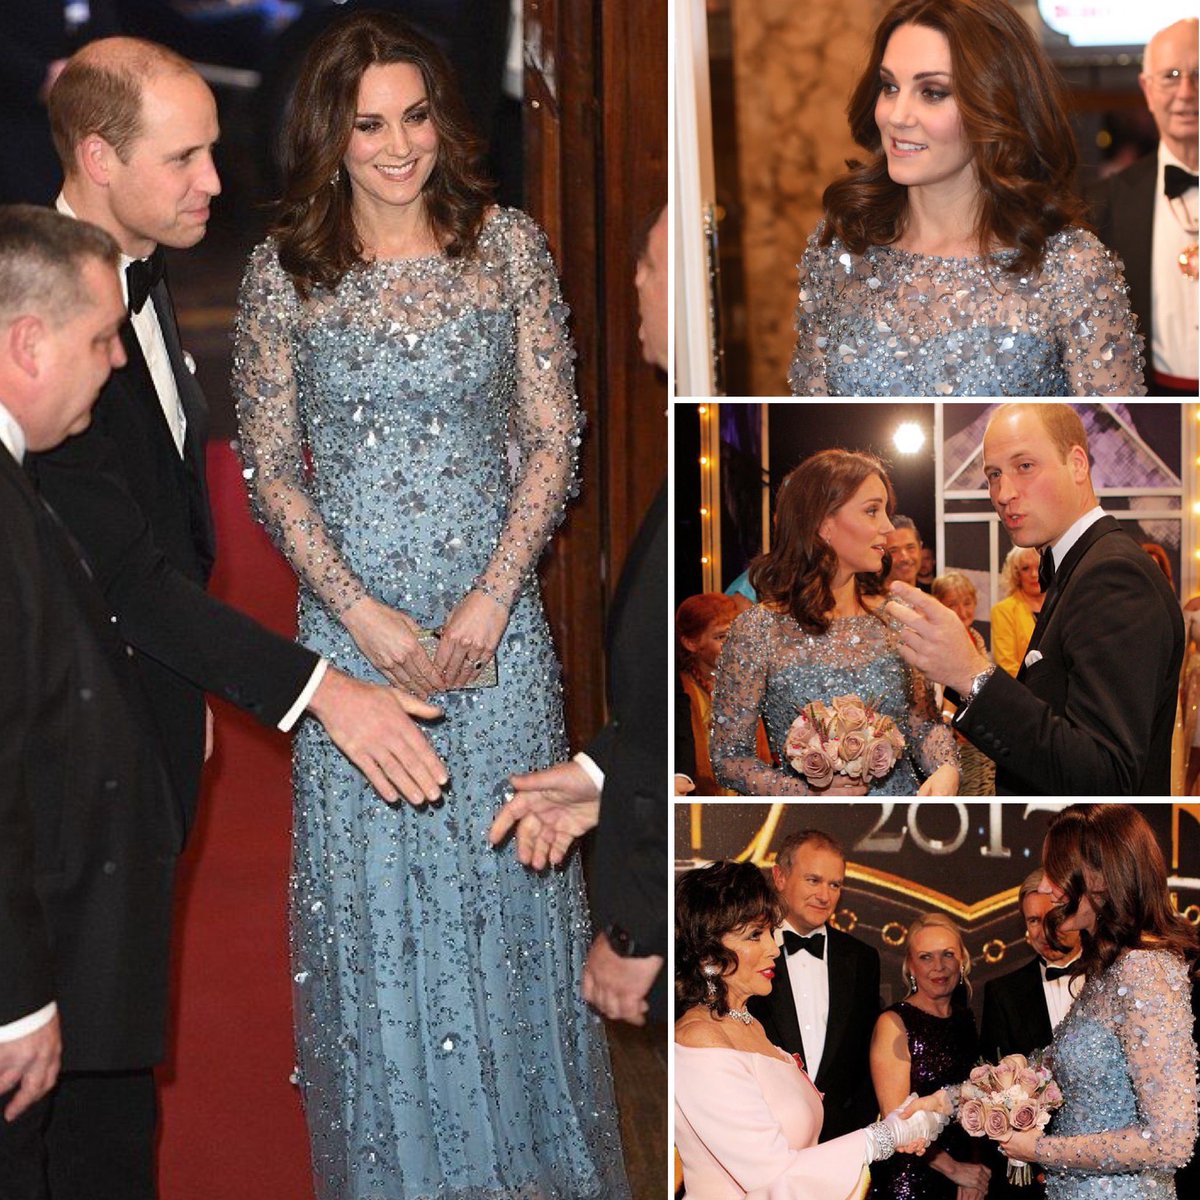 #OTD 2017 - The Duke and Duchess of Cambridge attended the @RoyalVariety Performance. Catherine was pregnant with Prince Louis at the time. 

#DukeandDuchessofCambridge